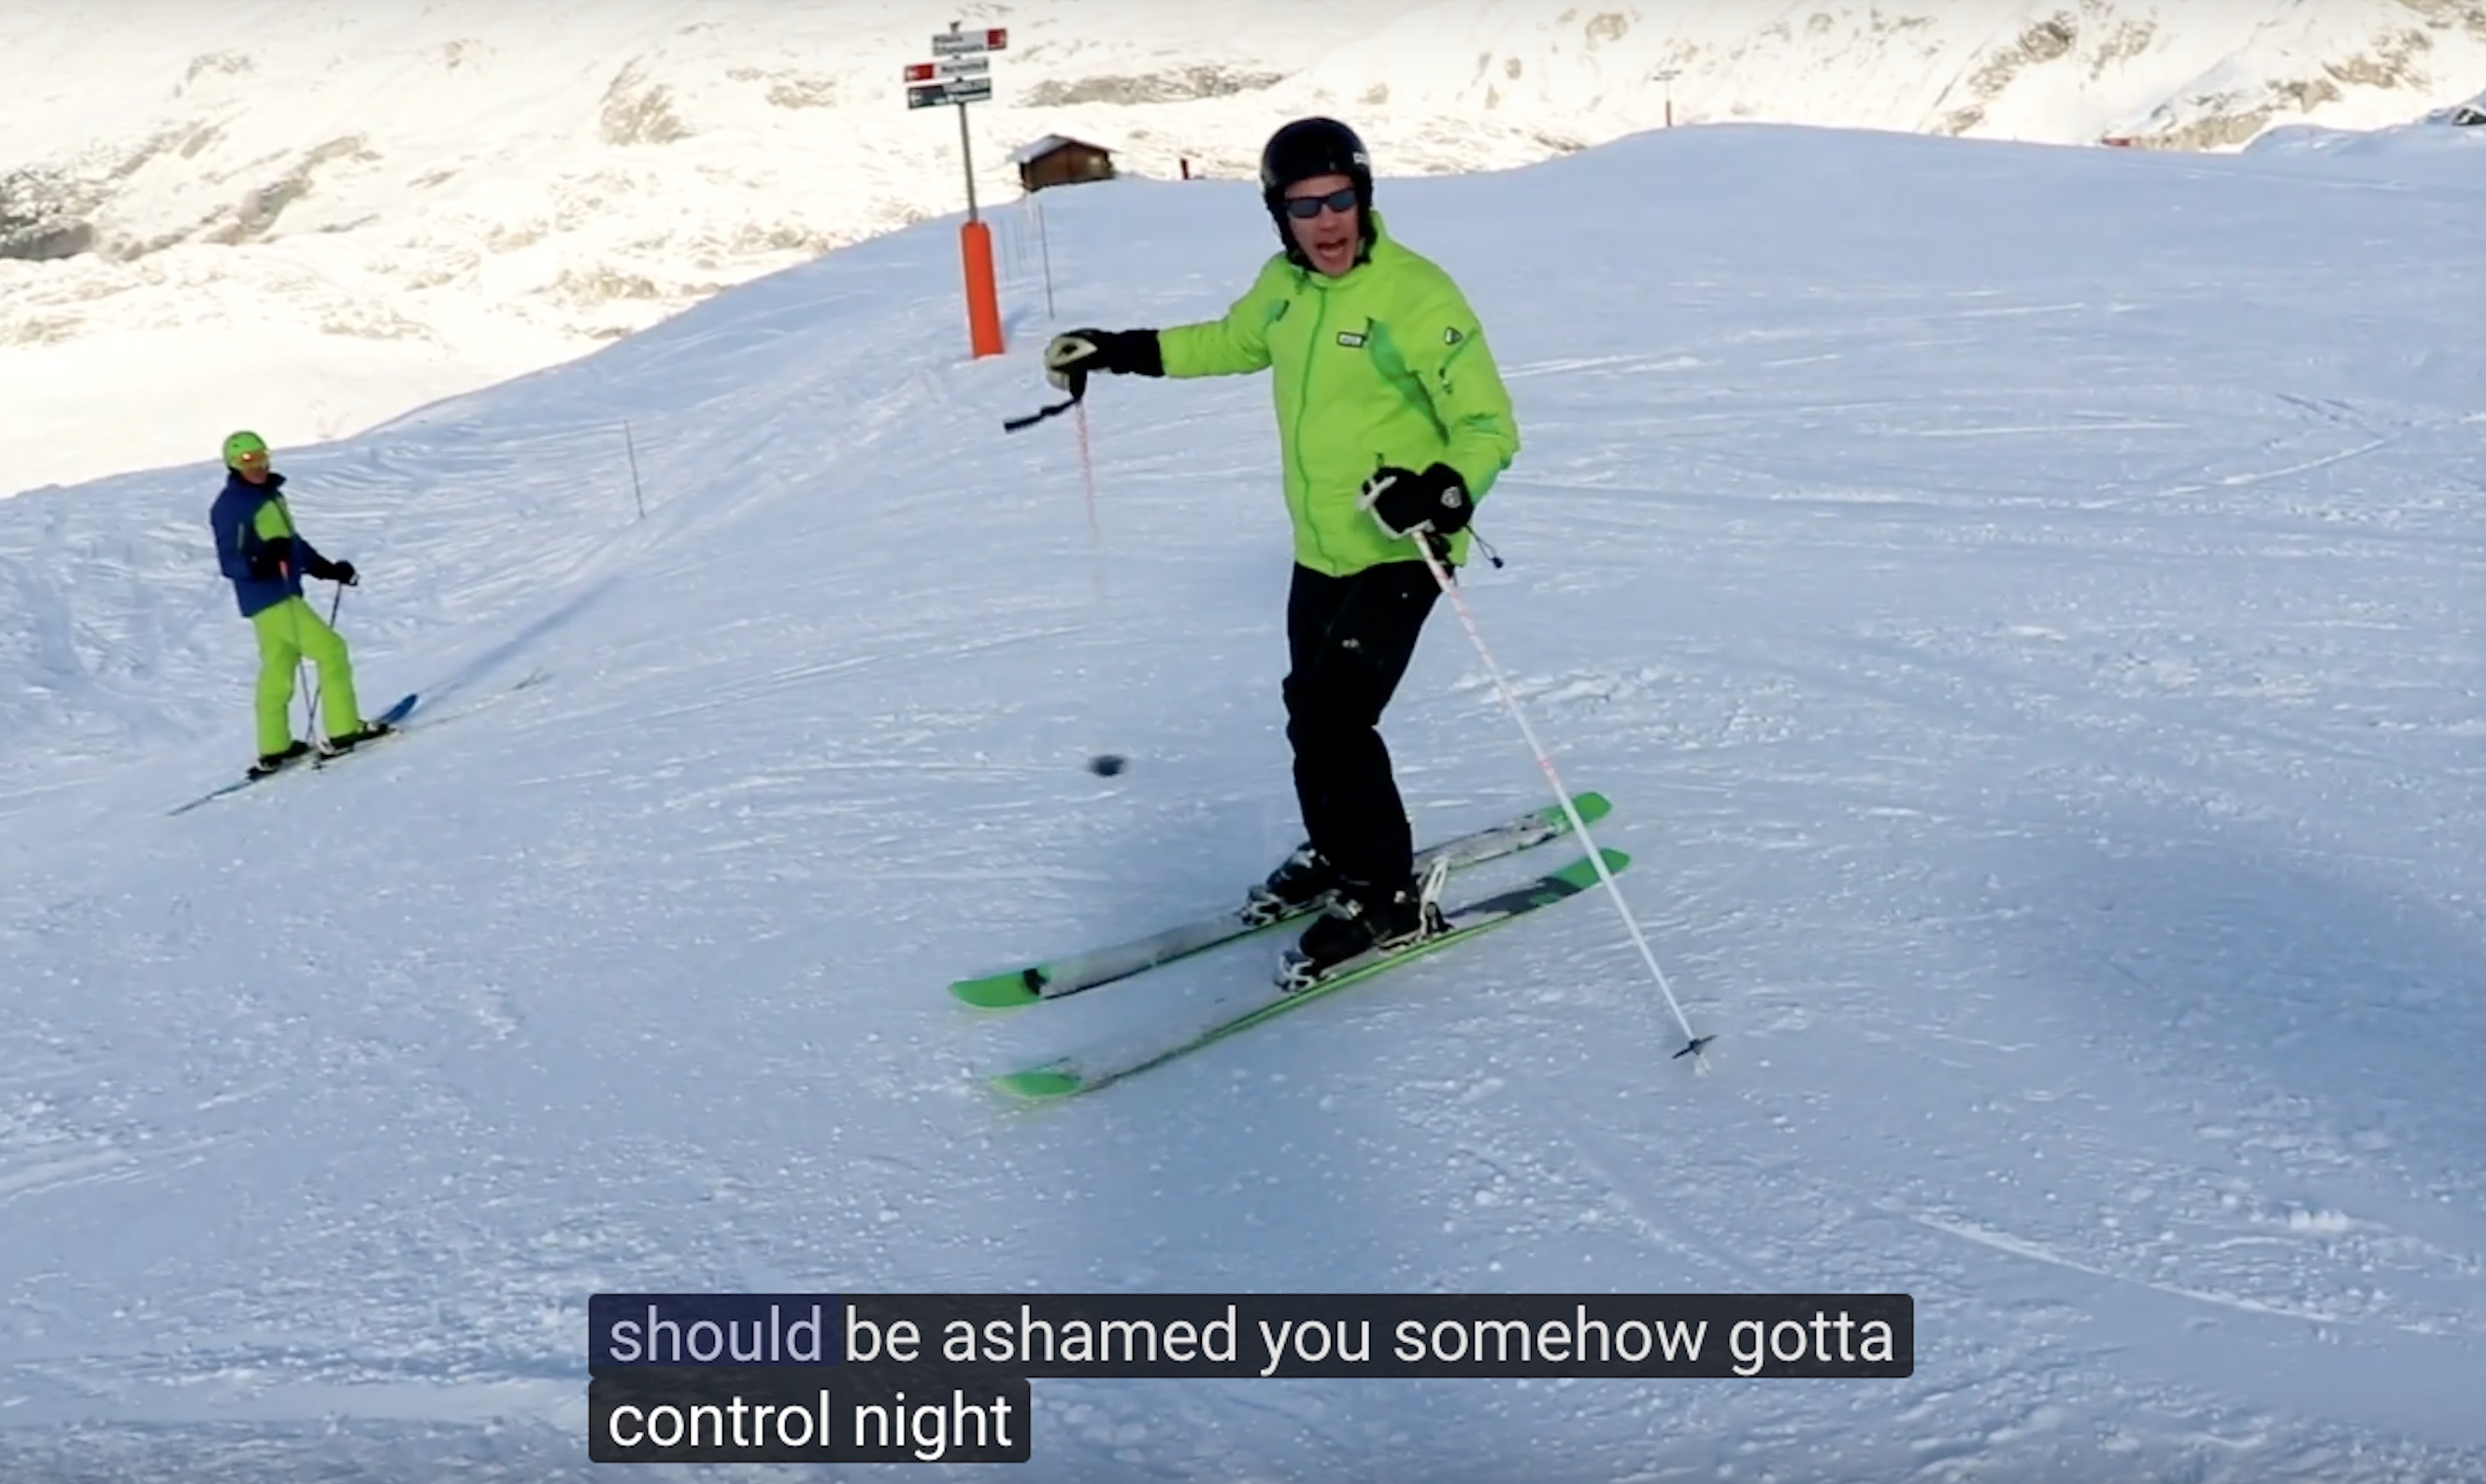 FUNNY: Professional Ski Racers Told "Grow Up" For Skiing Too Fast